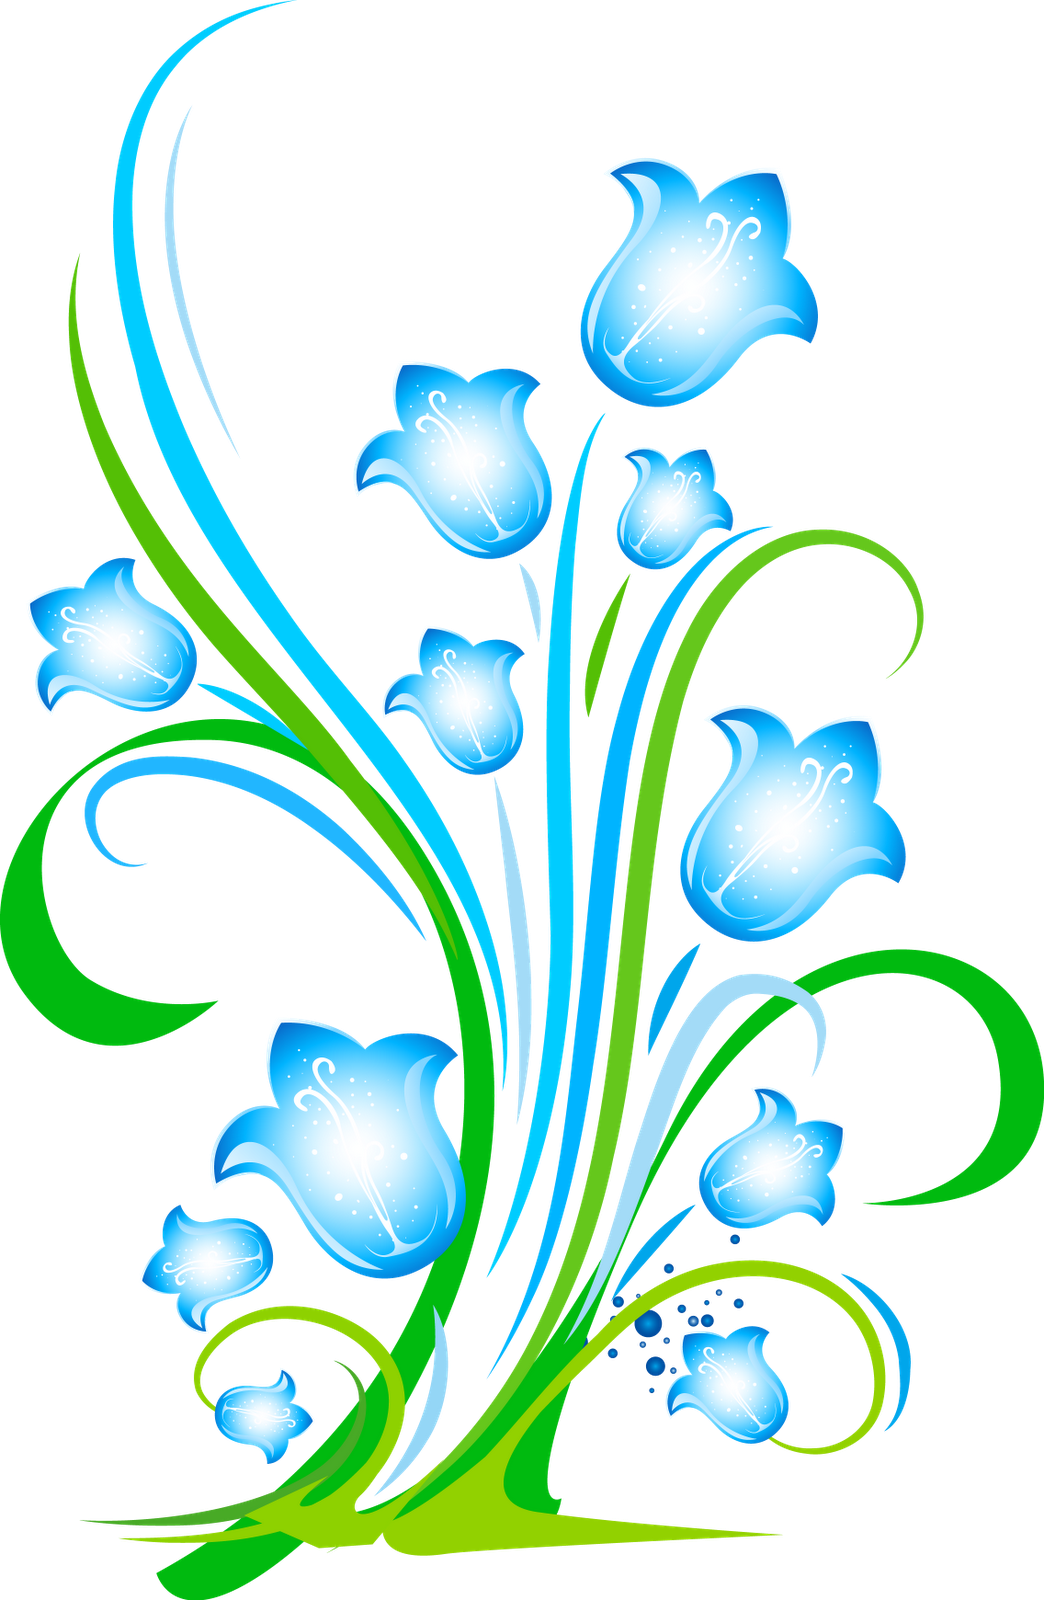 flower clipart for photoshop - photo #40